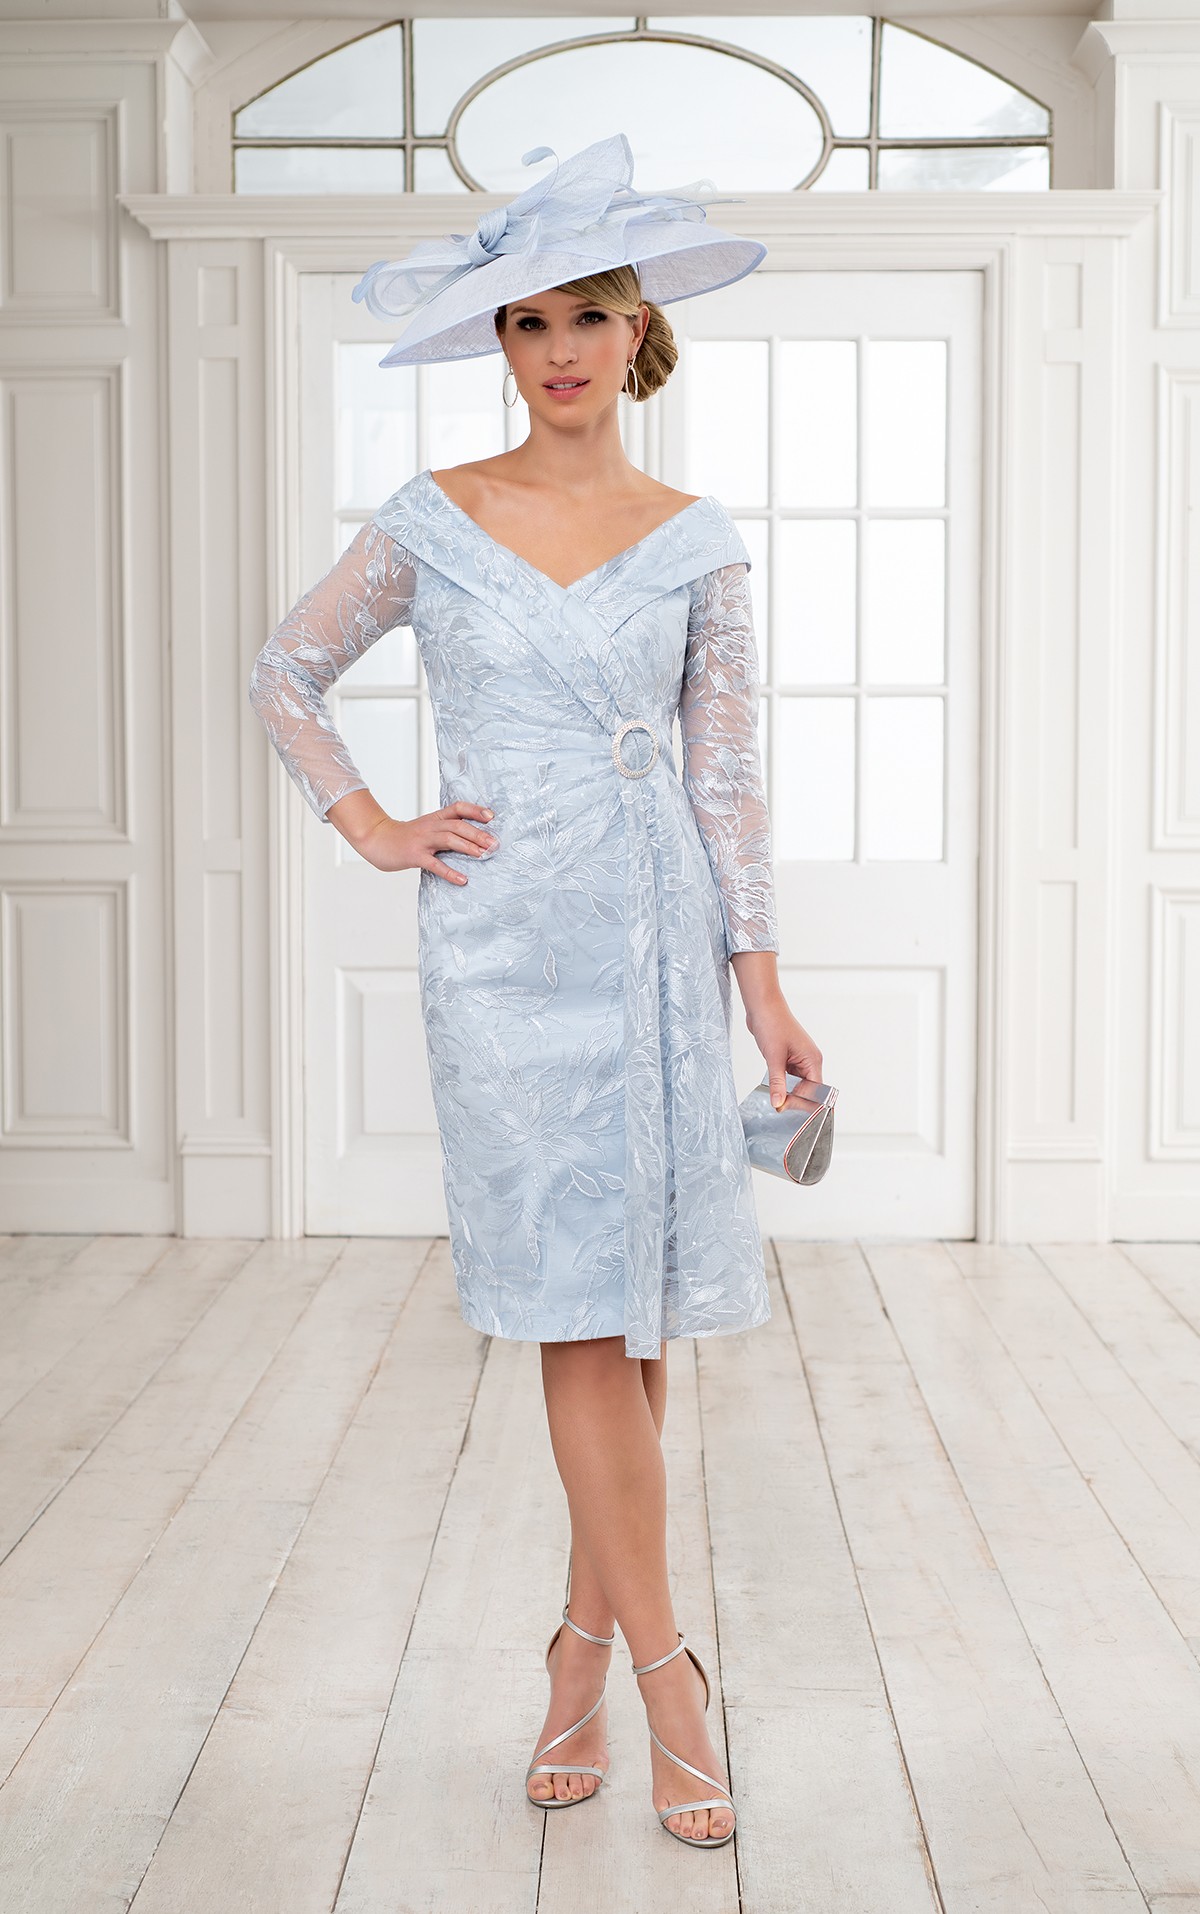 Ispirato ISH 814 - Ispirato ISH814  fitted Lace portrait neckline  dress with sleeves - Brighton's leading stockist for Mother of the Bride, Mother of the Groom & lady guest outfits - Occasions at Blessings 1 Loyal Parade, Mill rIse, Westdene,  Brighton. East Sussex BN1 5GG T: 01273 505766 E:occasions@blessingsbridal.co.uk